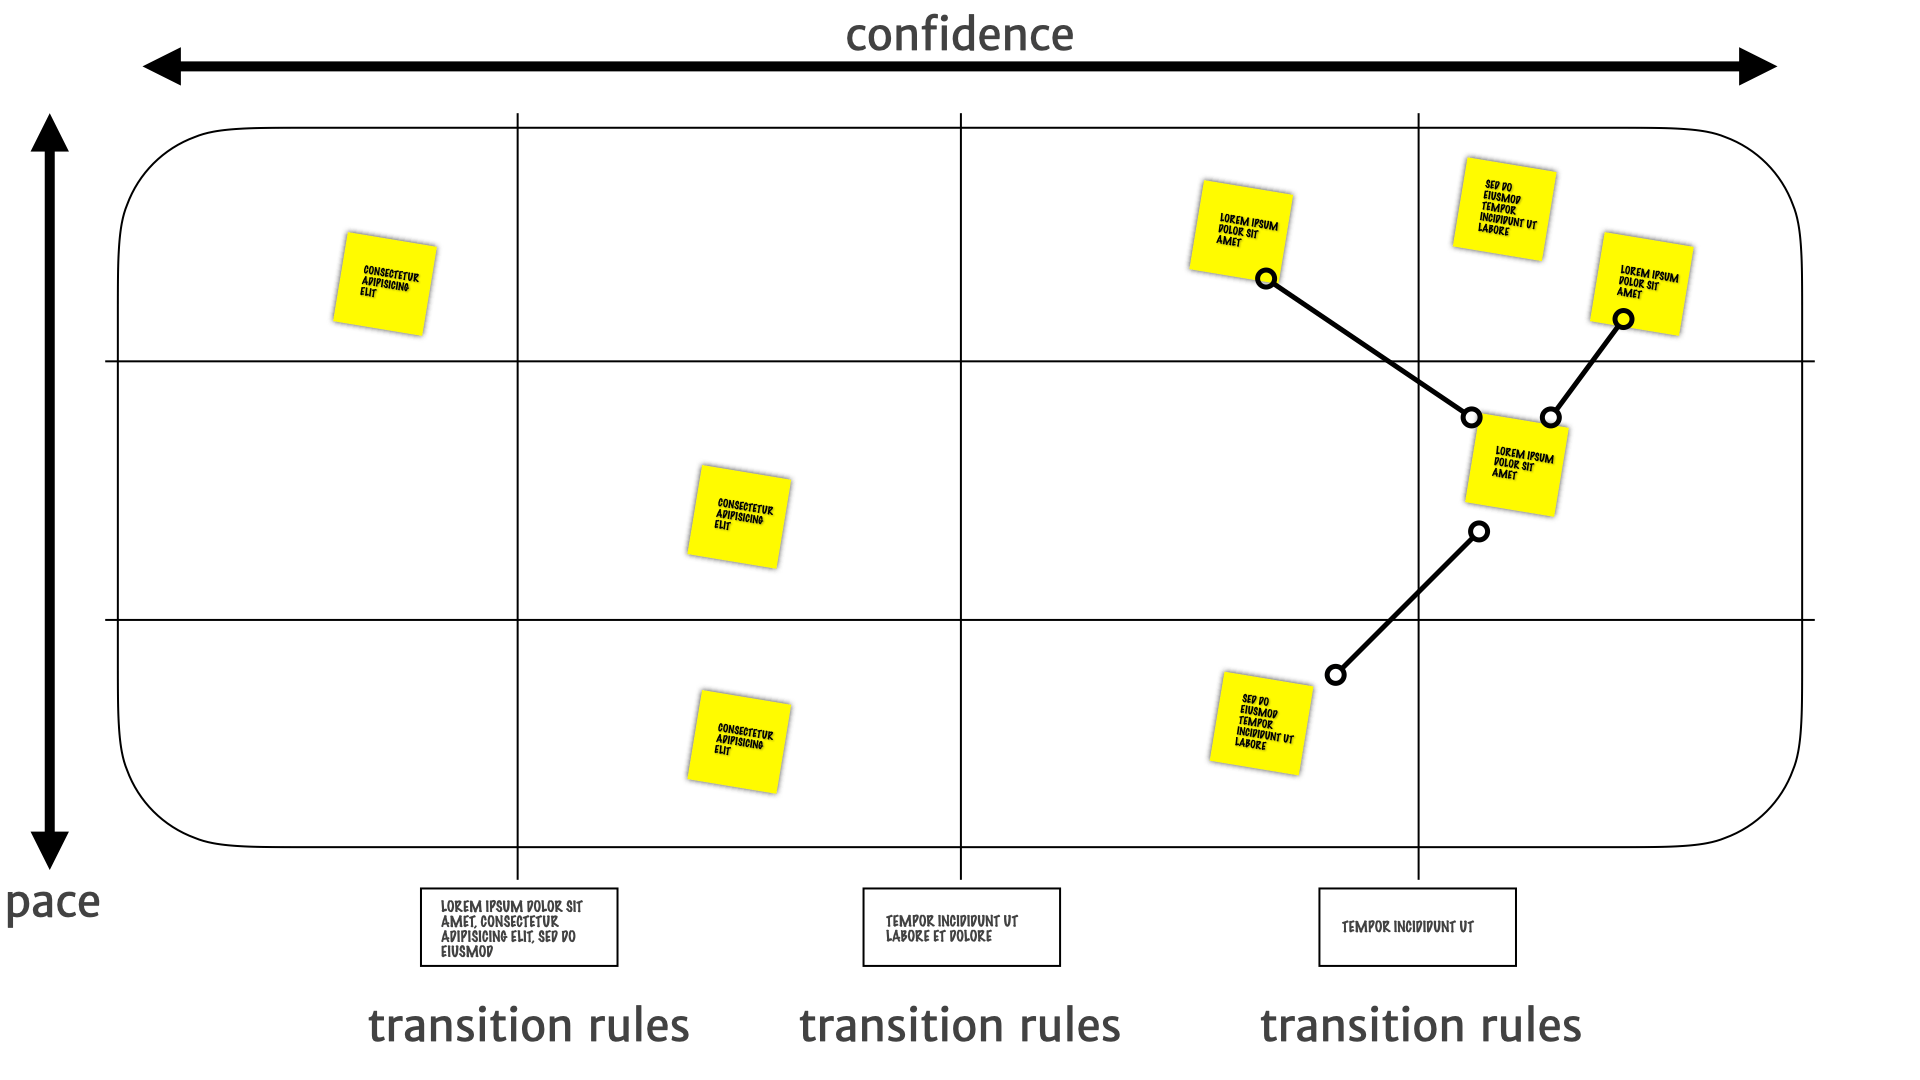 An example of a pace layer map drawing a connection between a stable insight at the bottom-right and a less stable insight in the centre-right, and then further connections between that less stable insight and two even less stable insights in the top-right.